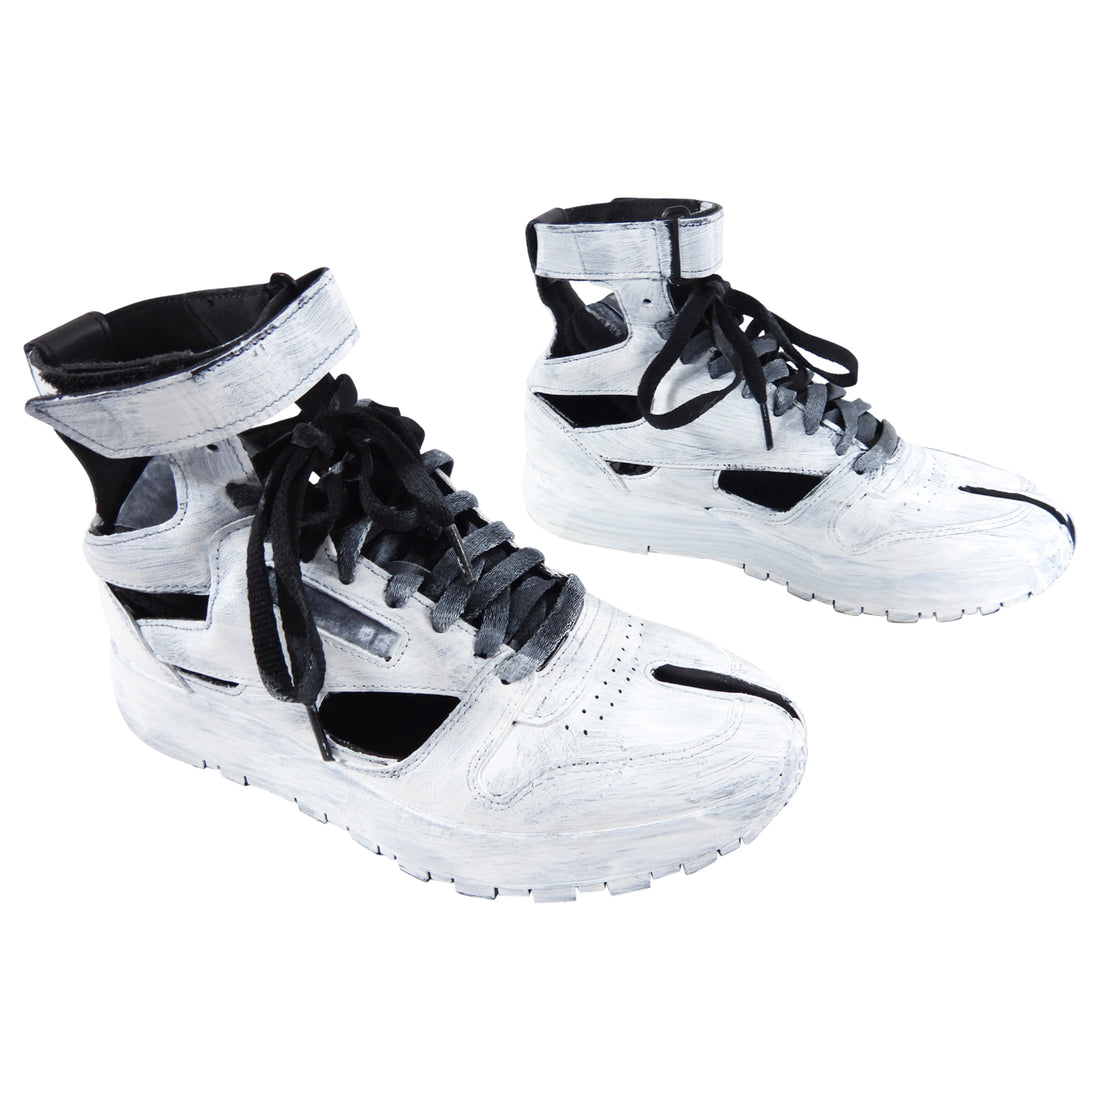 Margiela x Reebok Painted Cut out High Top Sneakers - USA 7.5